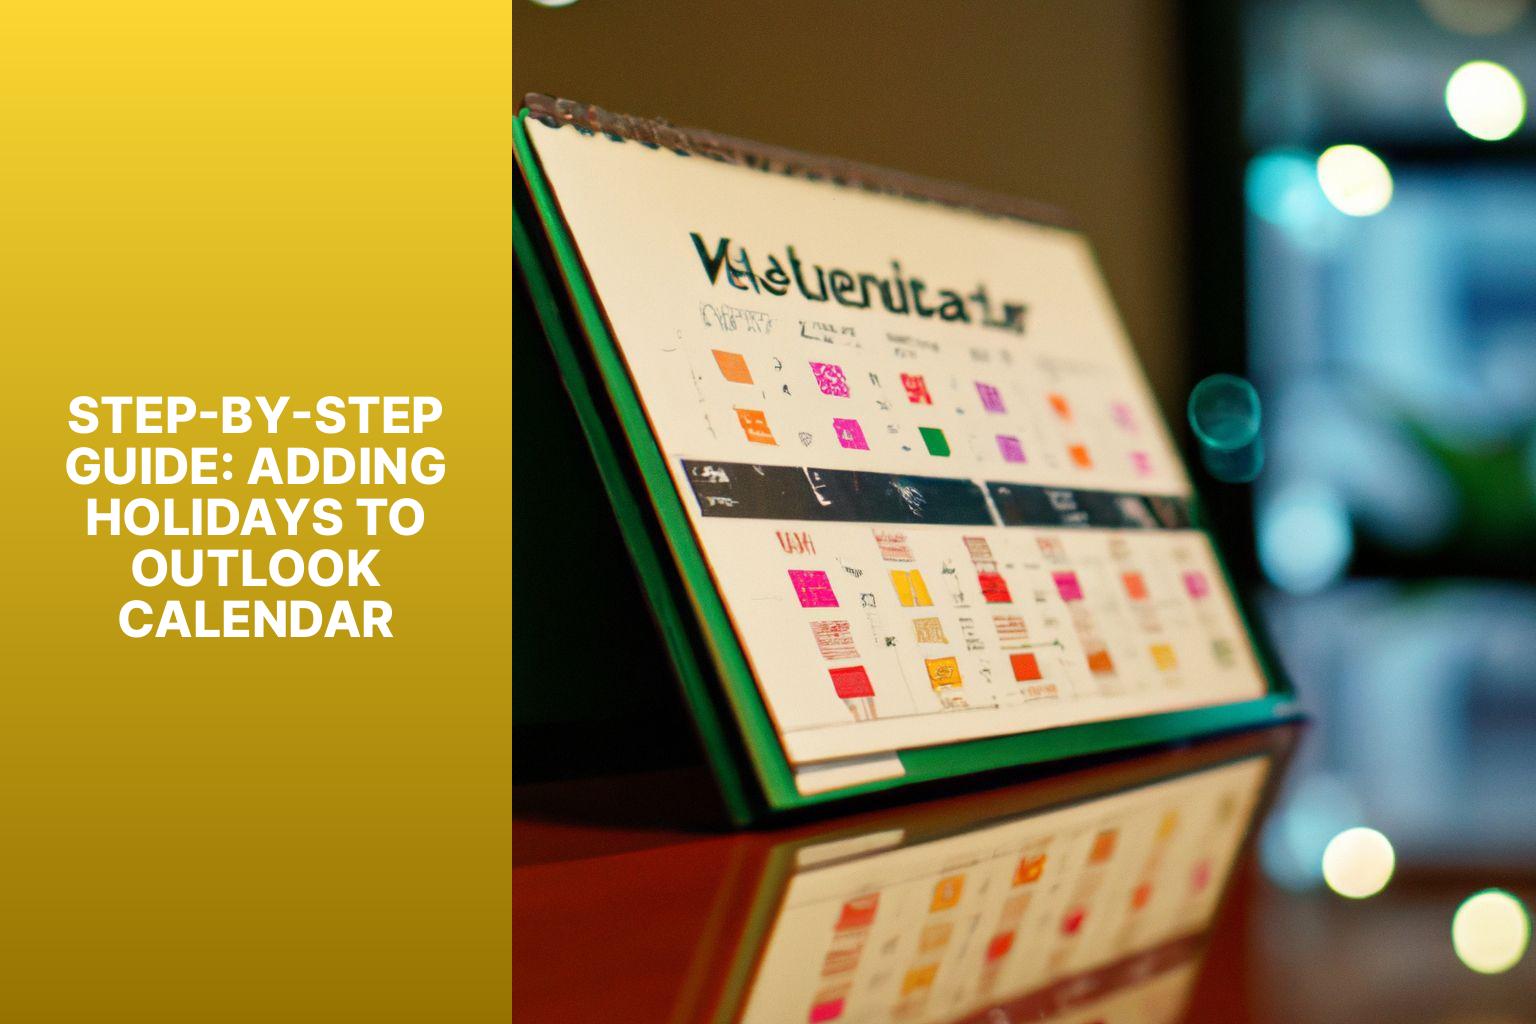 Step-by-Step Guide: Adding Holidays to Outlook Calendar - how to add holidays to outlook calendar 